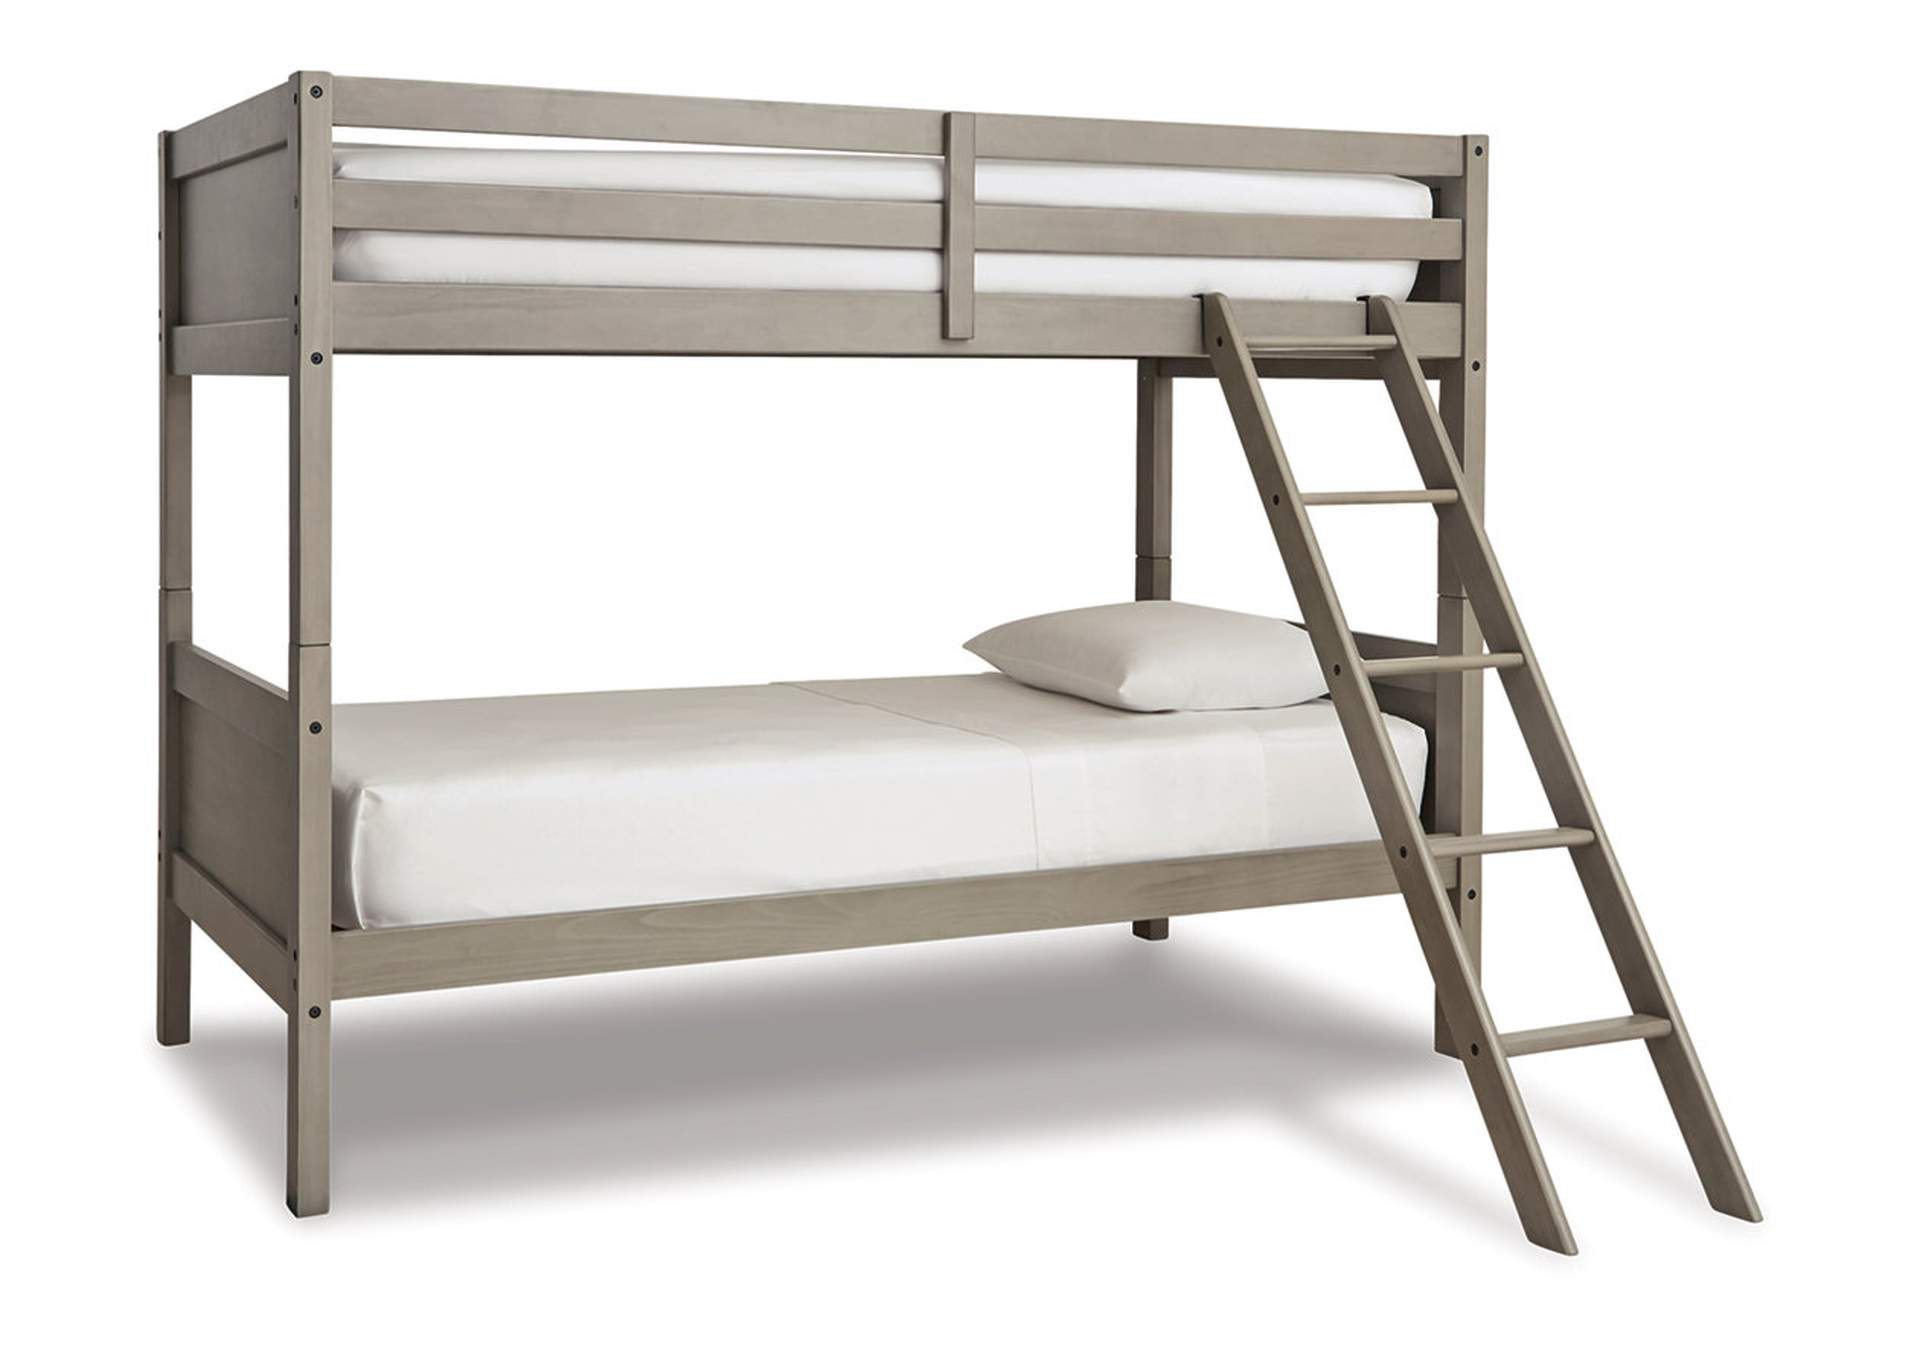 Twin Bunk Bed Frame For Off 62, Berkley Jensen Twin Size Bunk Bed With Trundle Instructions